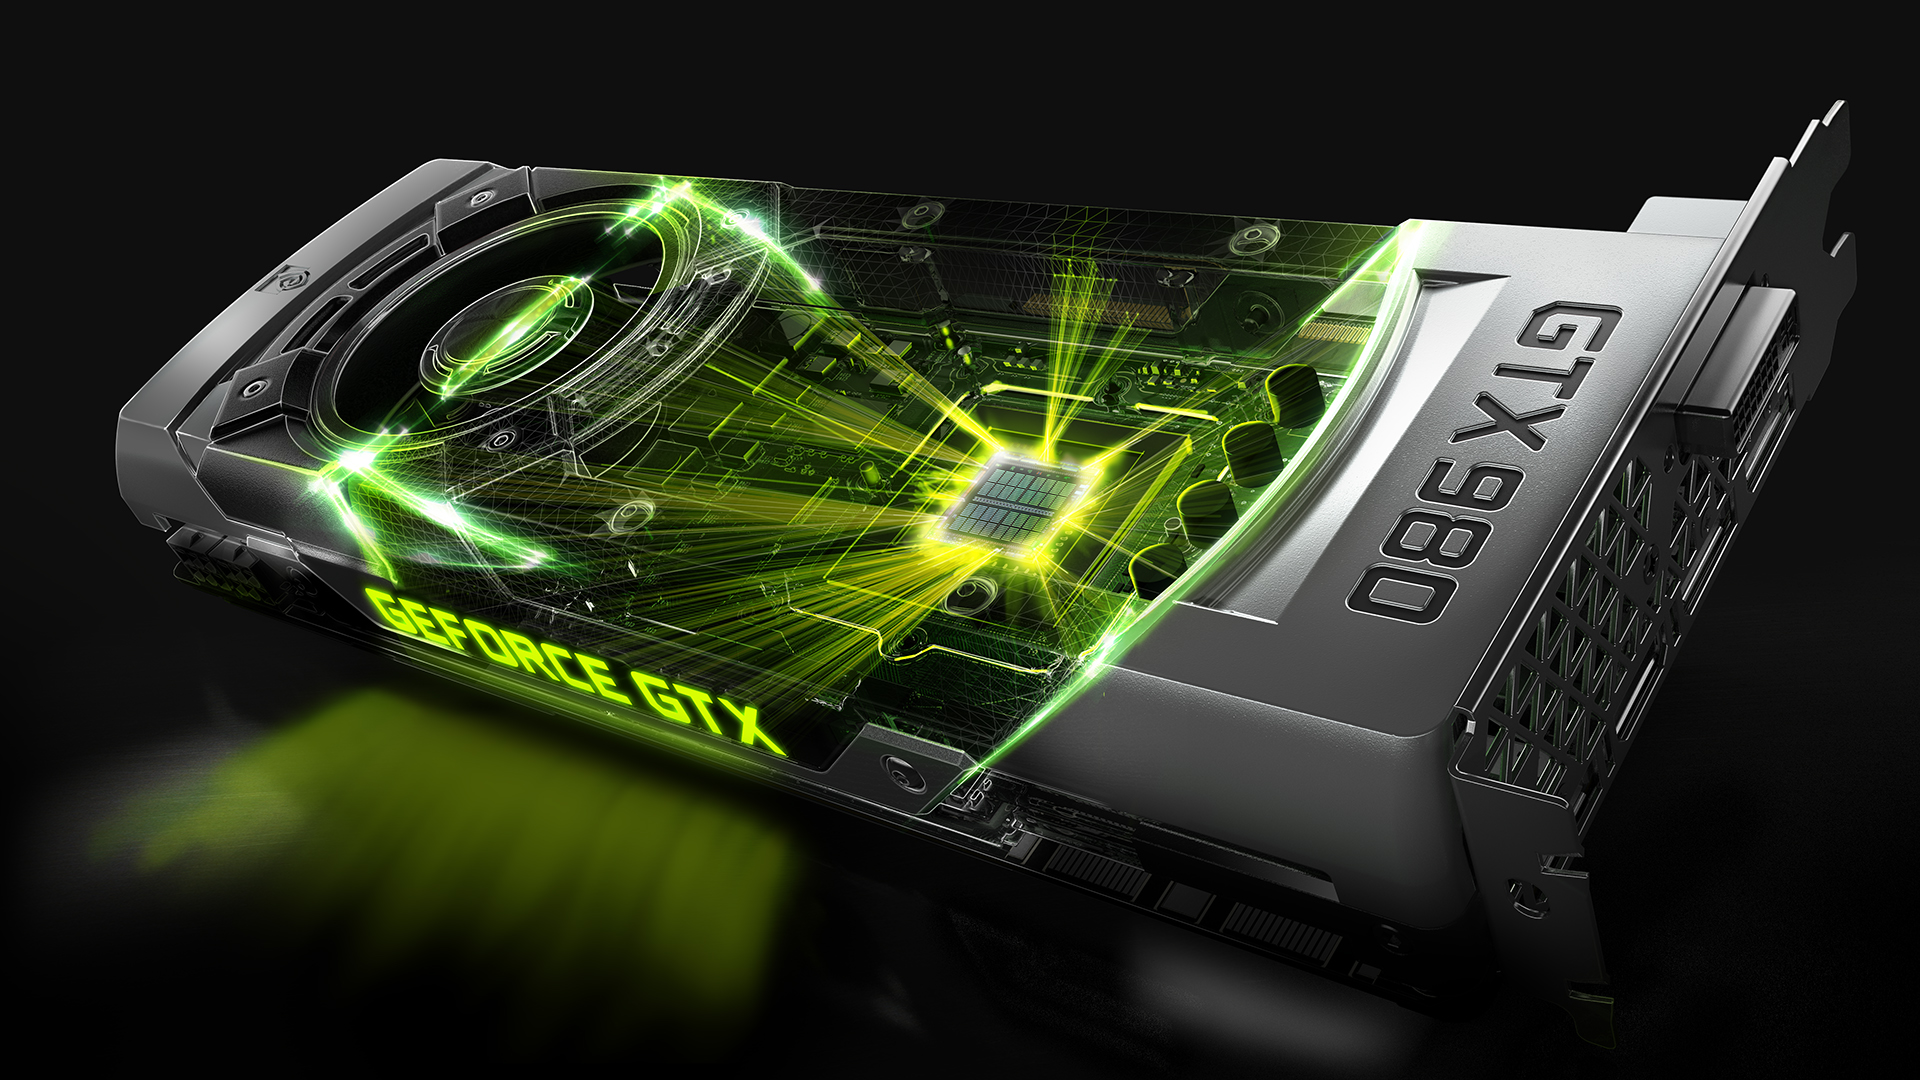 nvidia-to-bundle-a-free-ubisoft-game-with-geforce-gtx-graphics-cards